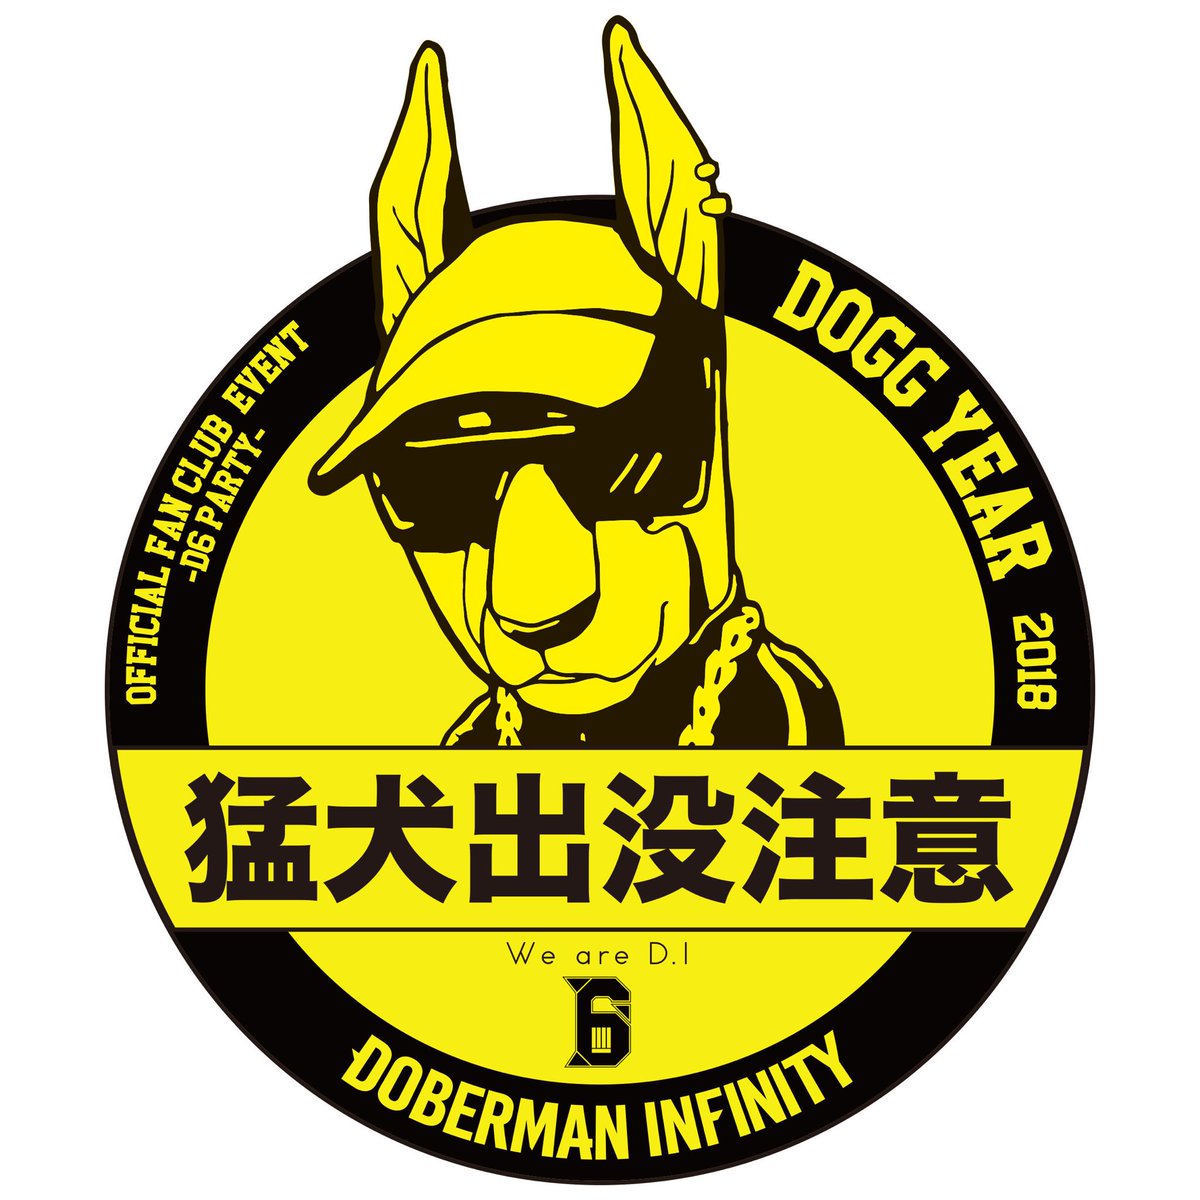 Doberman Infinity ファンクラブ We Are D I 情報 会員限定イベント Doberman Infinity Official Fan Club Event D6 Party Dogg Year 開幕 の開催が決定しました 新年の始まりから一緒に盛り上がりましょう 詳しくは We Are D Iサイトを